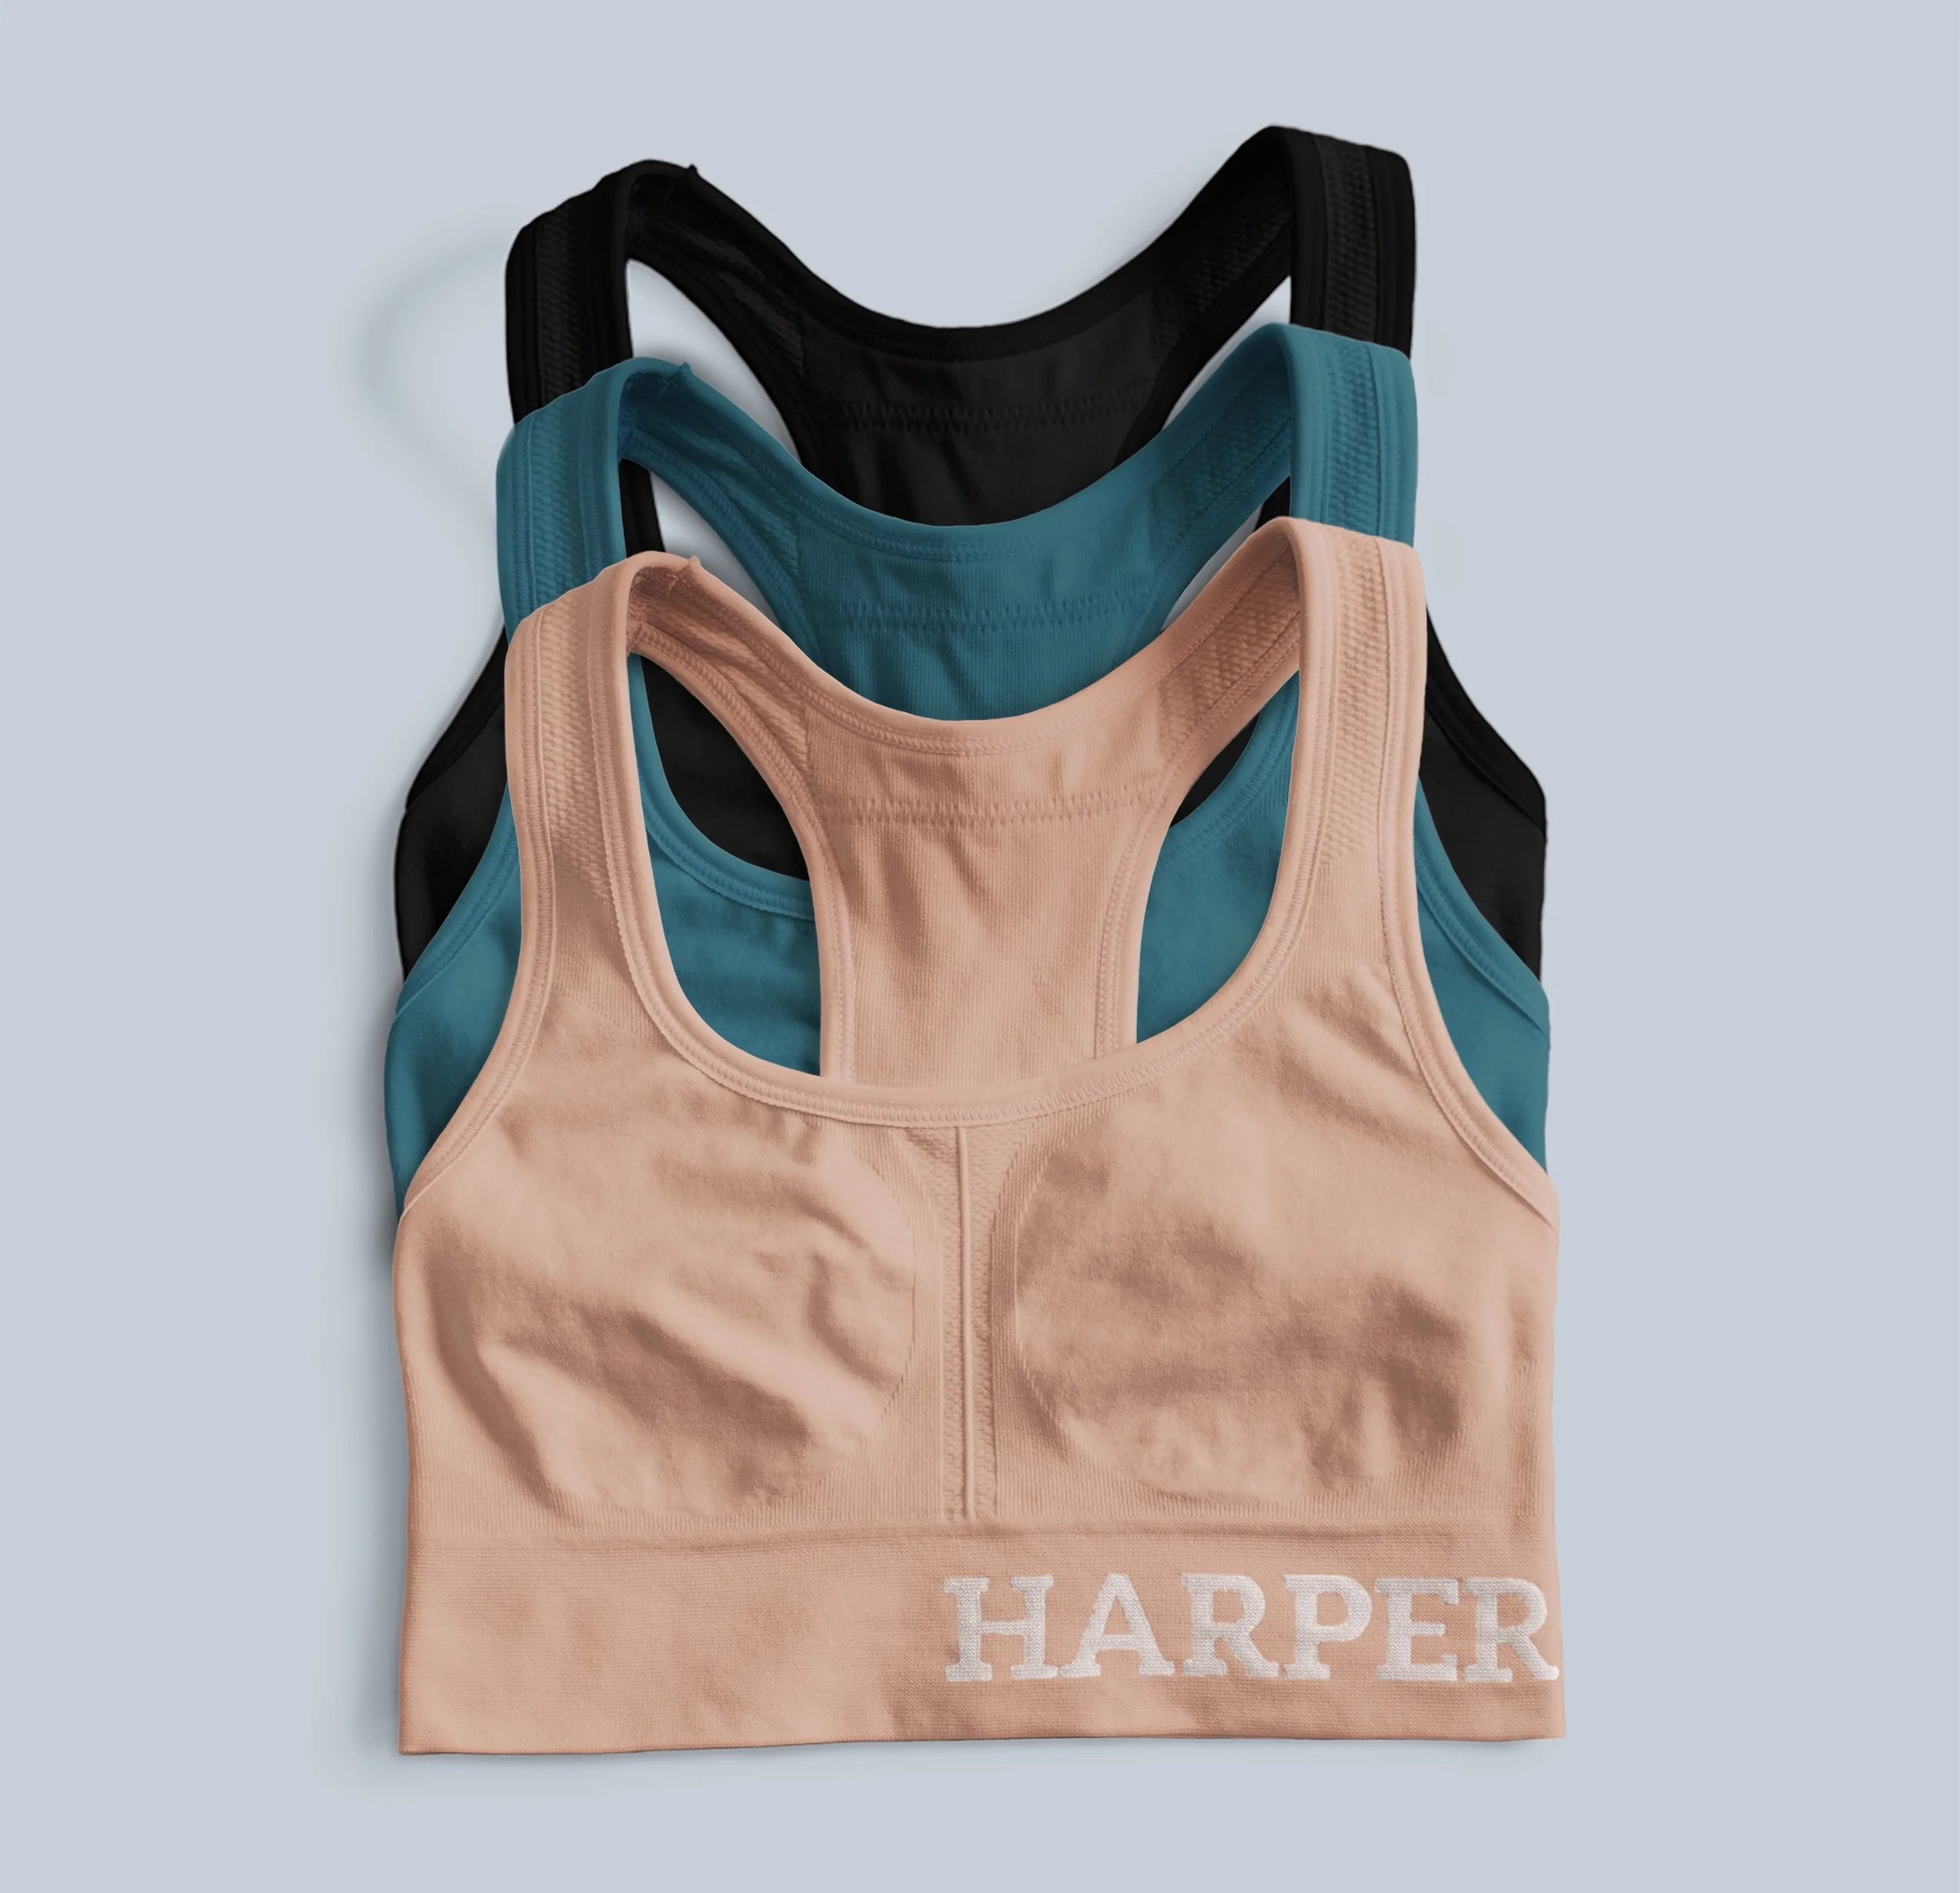 Inclusive lingerie brand Harper Wilde introduces sports bras and bralettes